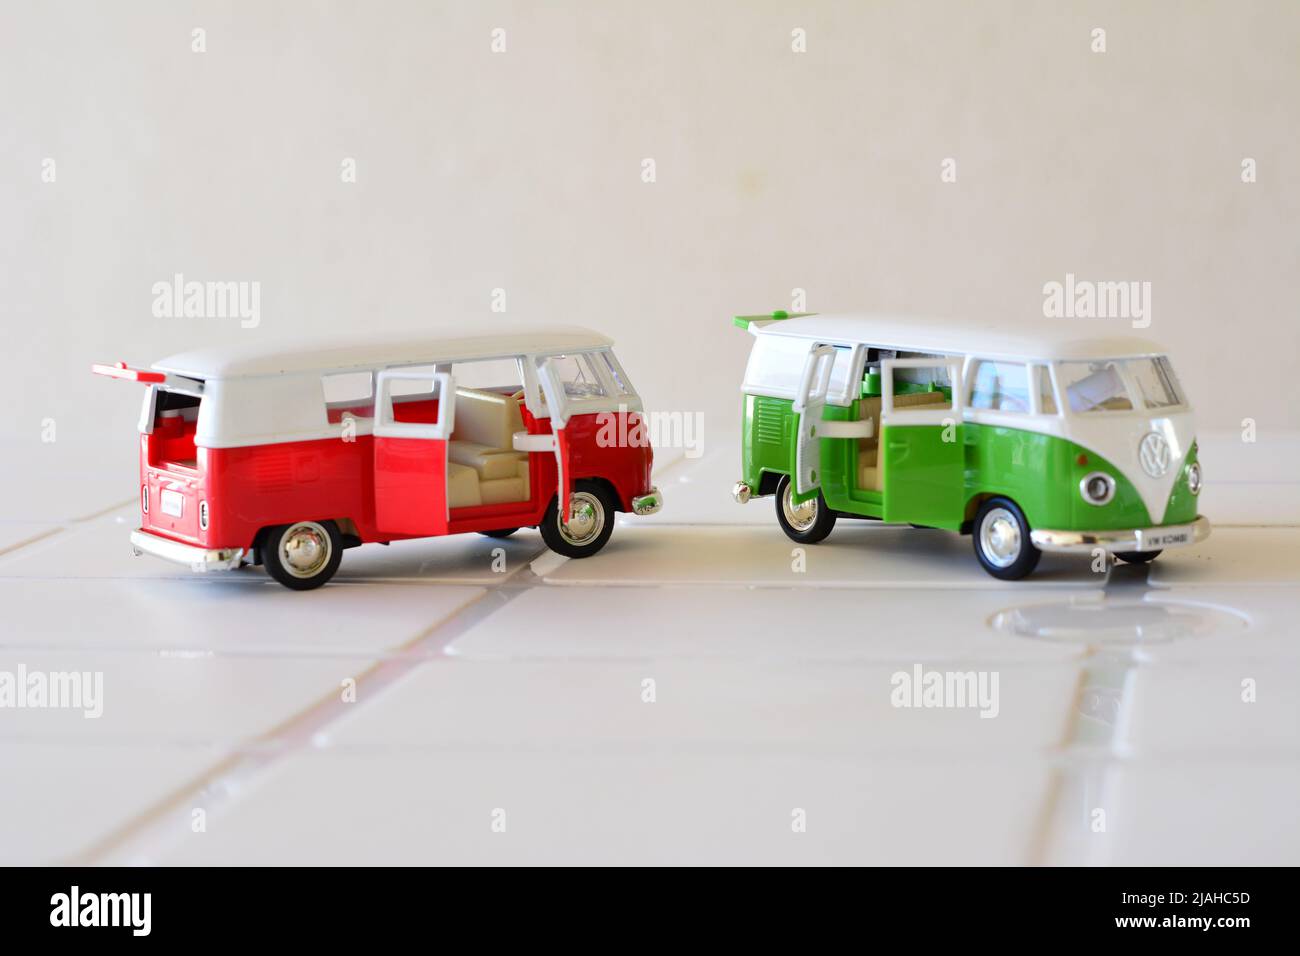 Diecast, Iron miniature, red and green color van, Brazil, South America, side view, selective focus, white background, with open doors, copy space Stock Photo